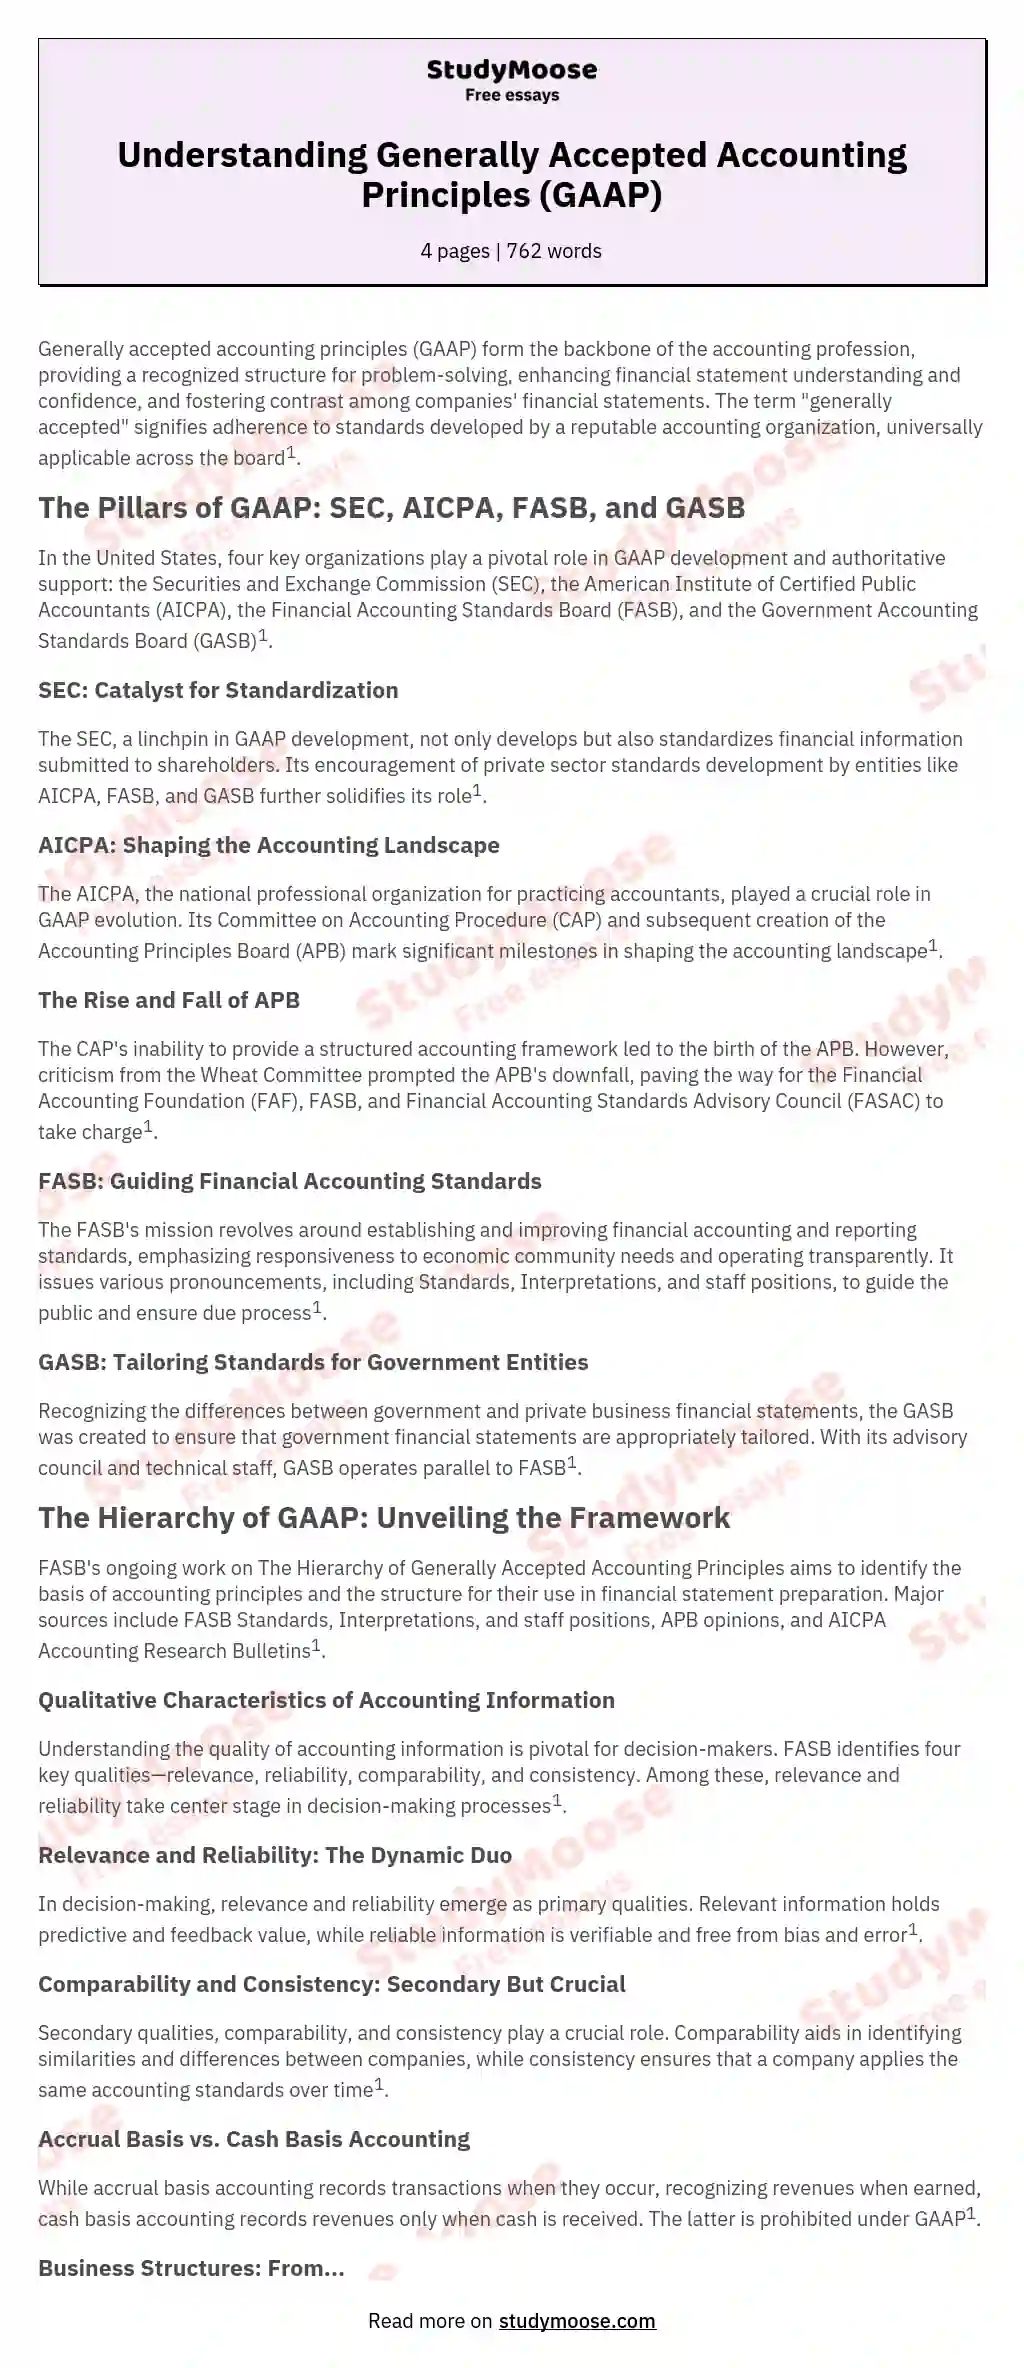 Understanding Generally Accepted Accounting Principles (GAAP) essay